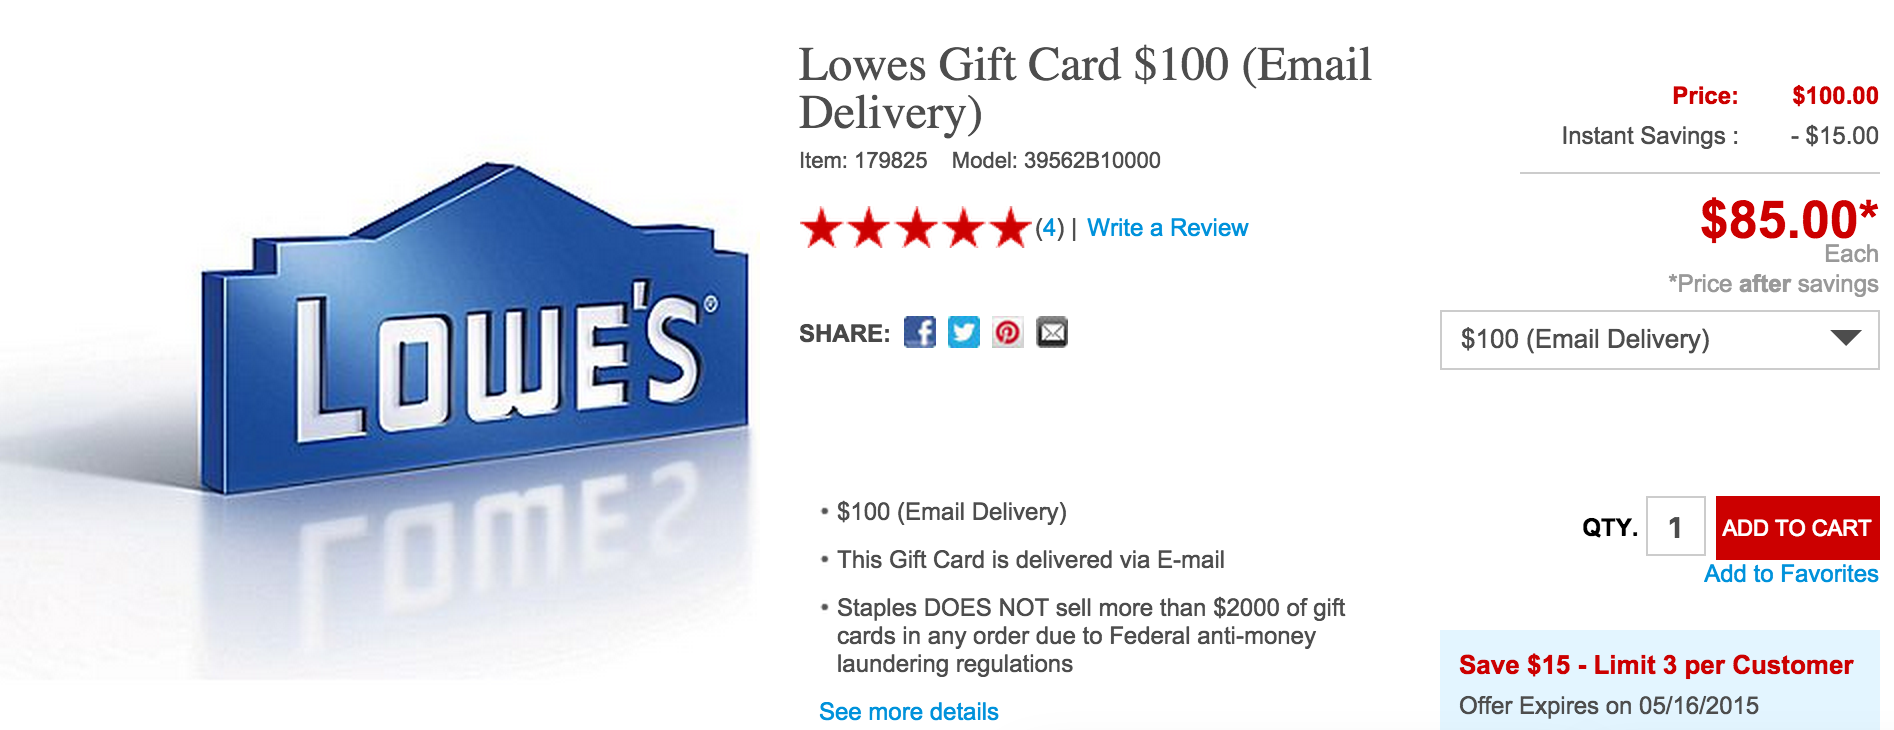 Lowes $100 gift card email delivery: $85 at Staples